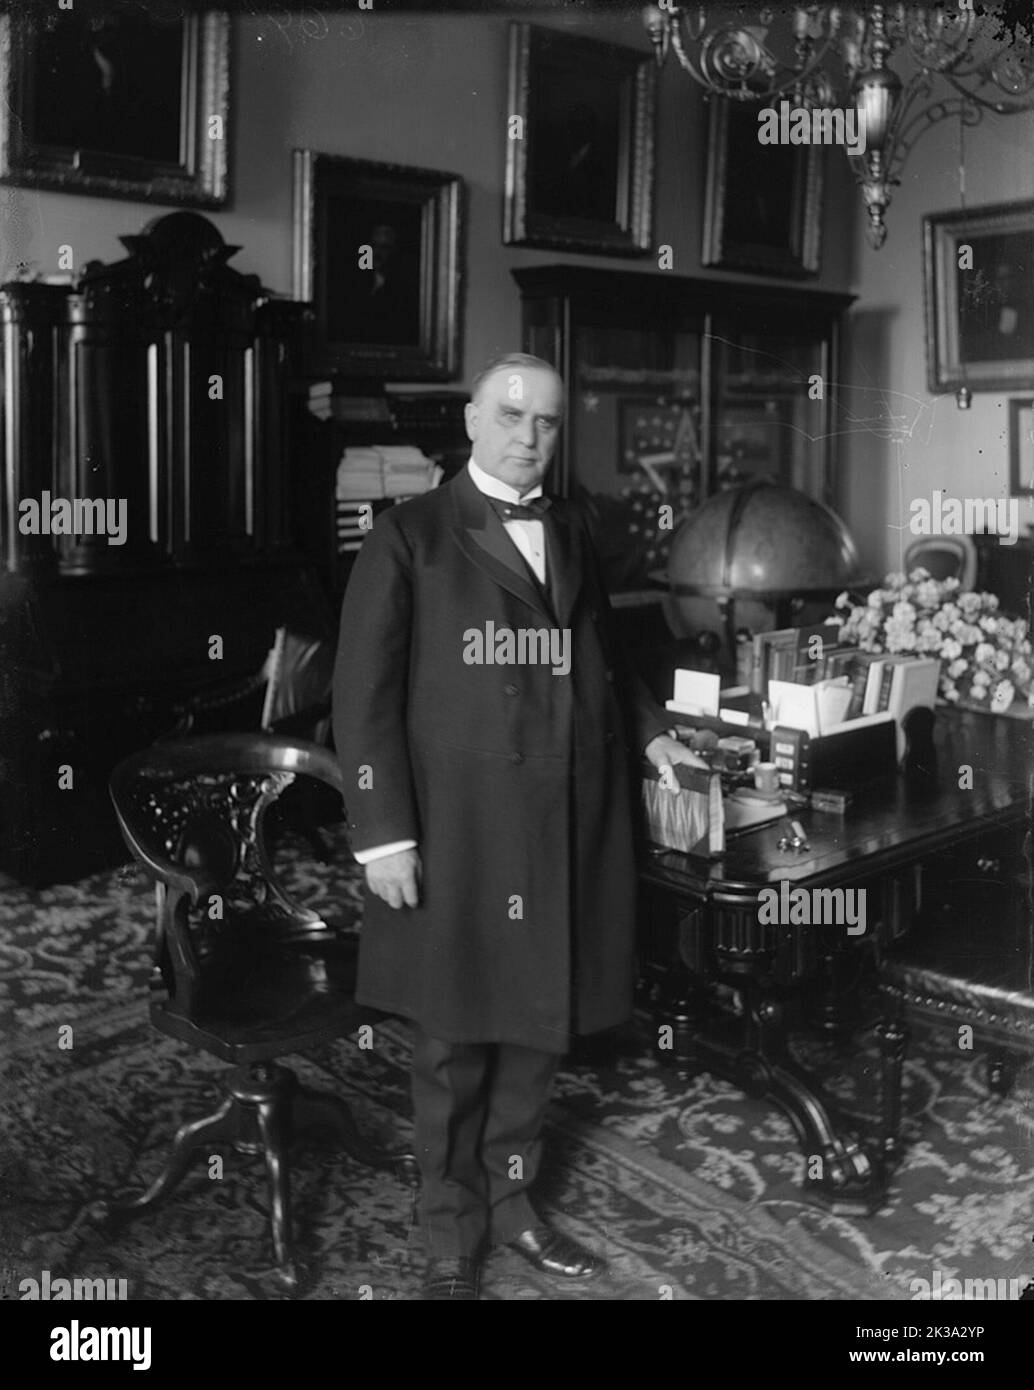 A portrait of US President William McKinley at his desk in the Treaty Room of the White House. McKinley was the 25th president of the USA, and the third of four to be assassinated. He was shot by Leon Czolgosz on 6th September 1901. Like James Garfield, McKinley briefly recovered from the wounds, to die of sepsis some time later. In this engraving he is seen as a presidential candidate. Stock Photo